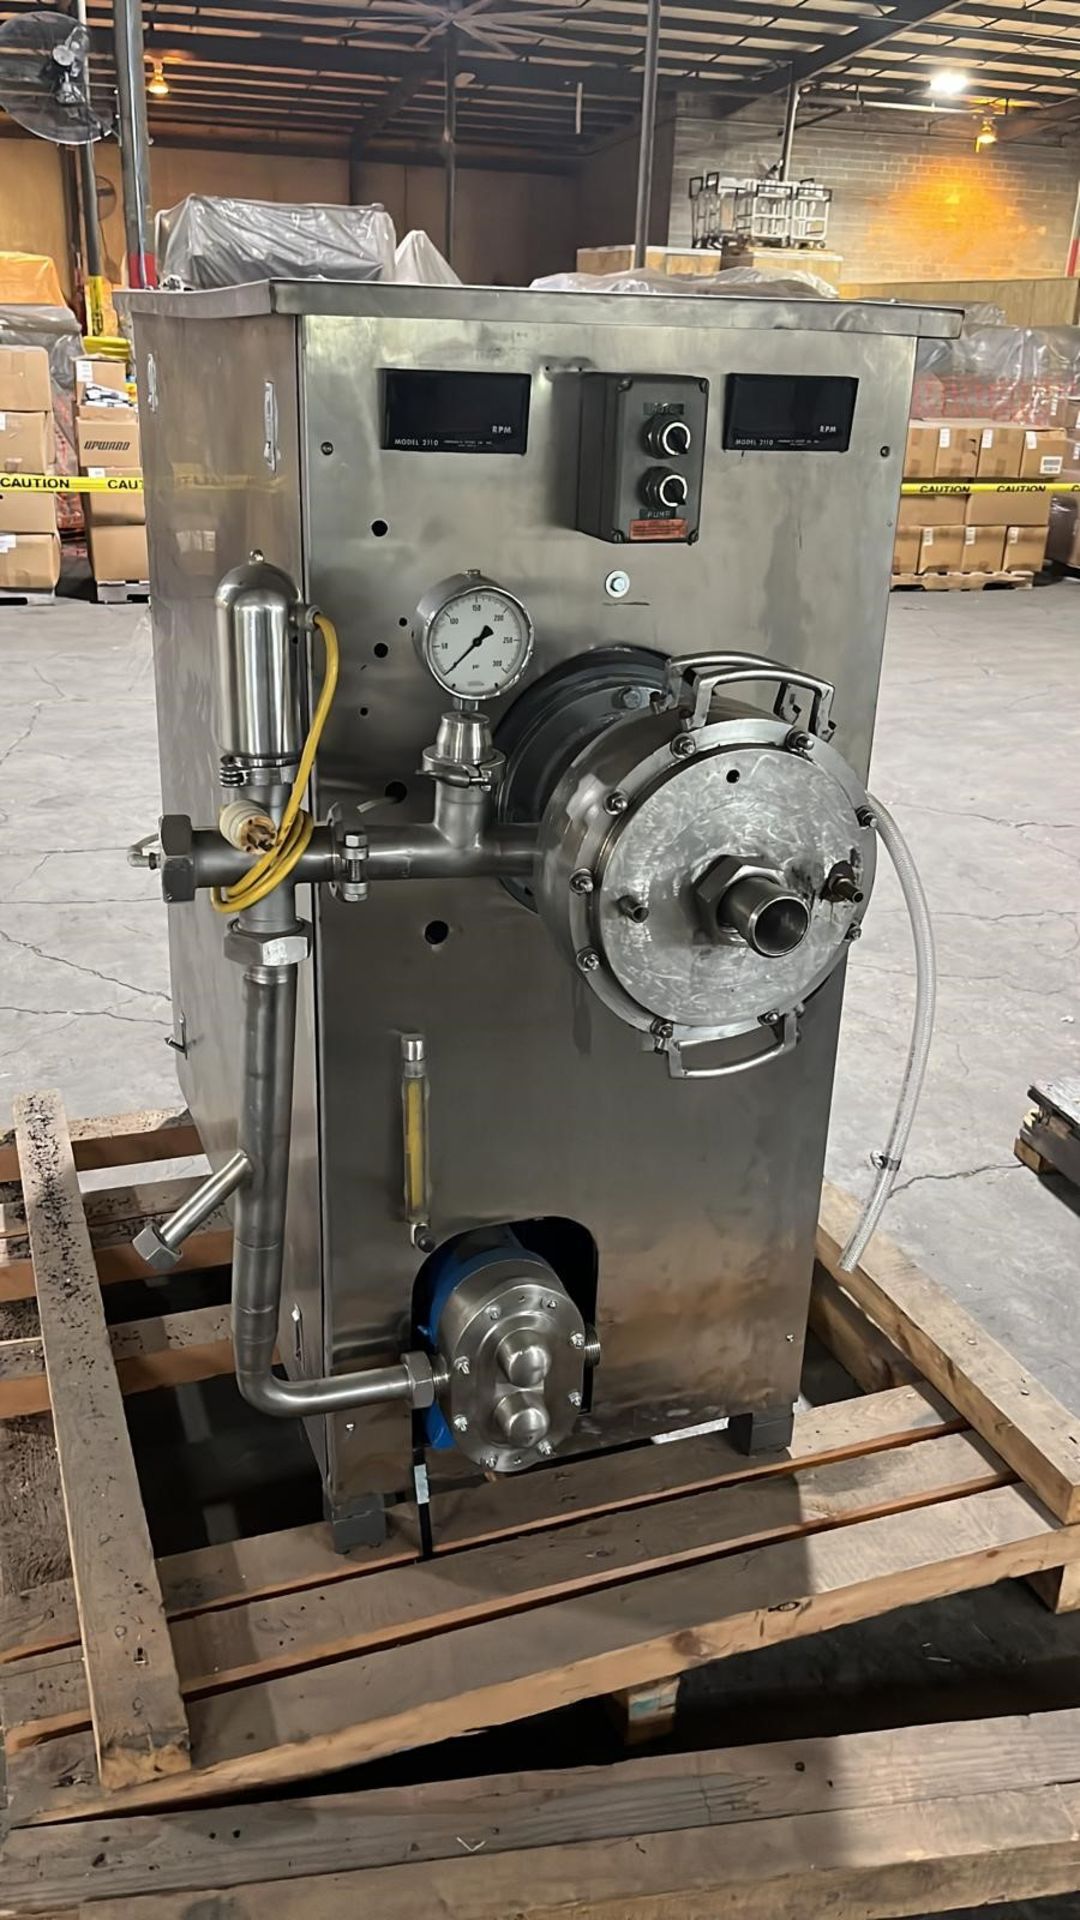 Goodway Continous Mixer, S/N QC002-2011, Includes 150 Liter Batter Holding Tank, S/S Holding Tank